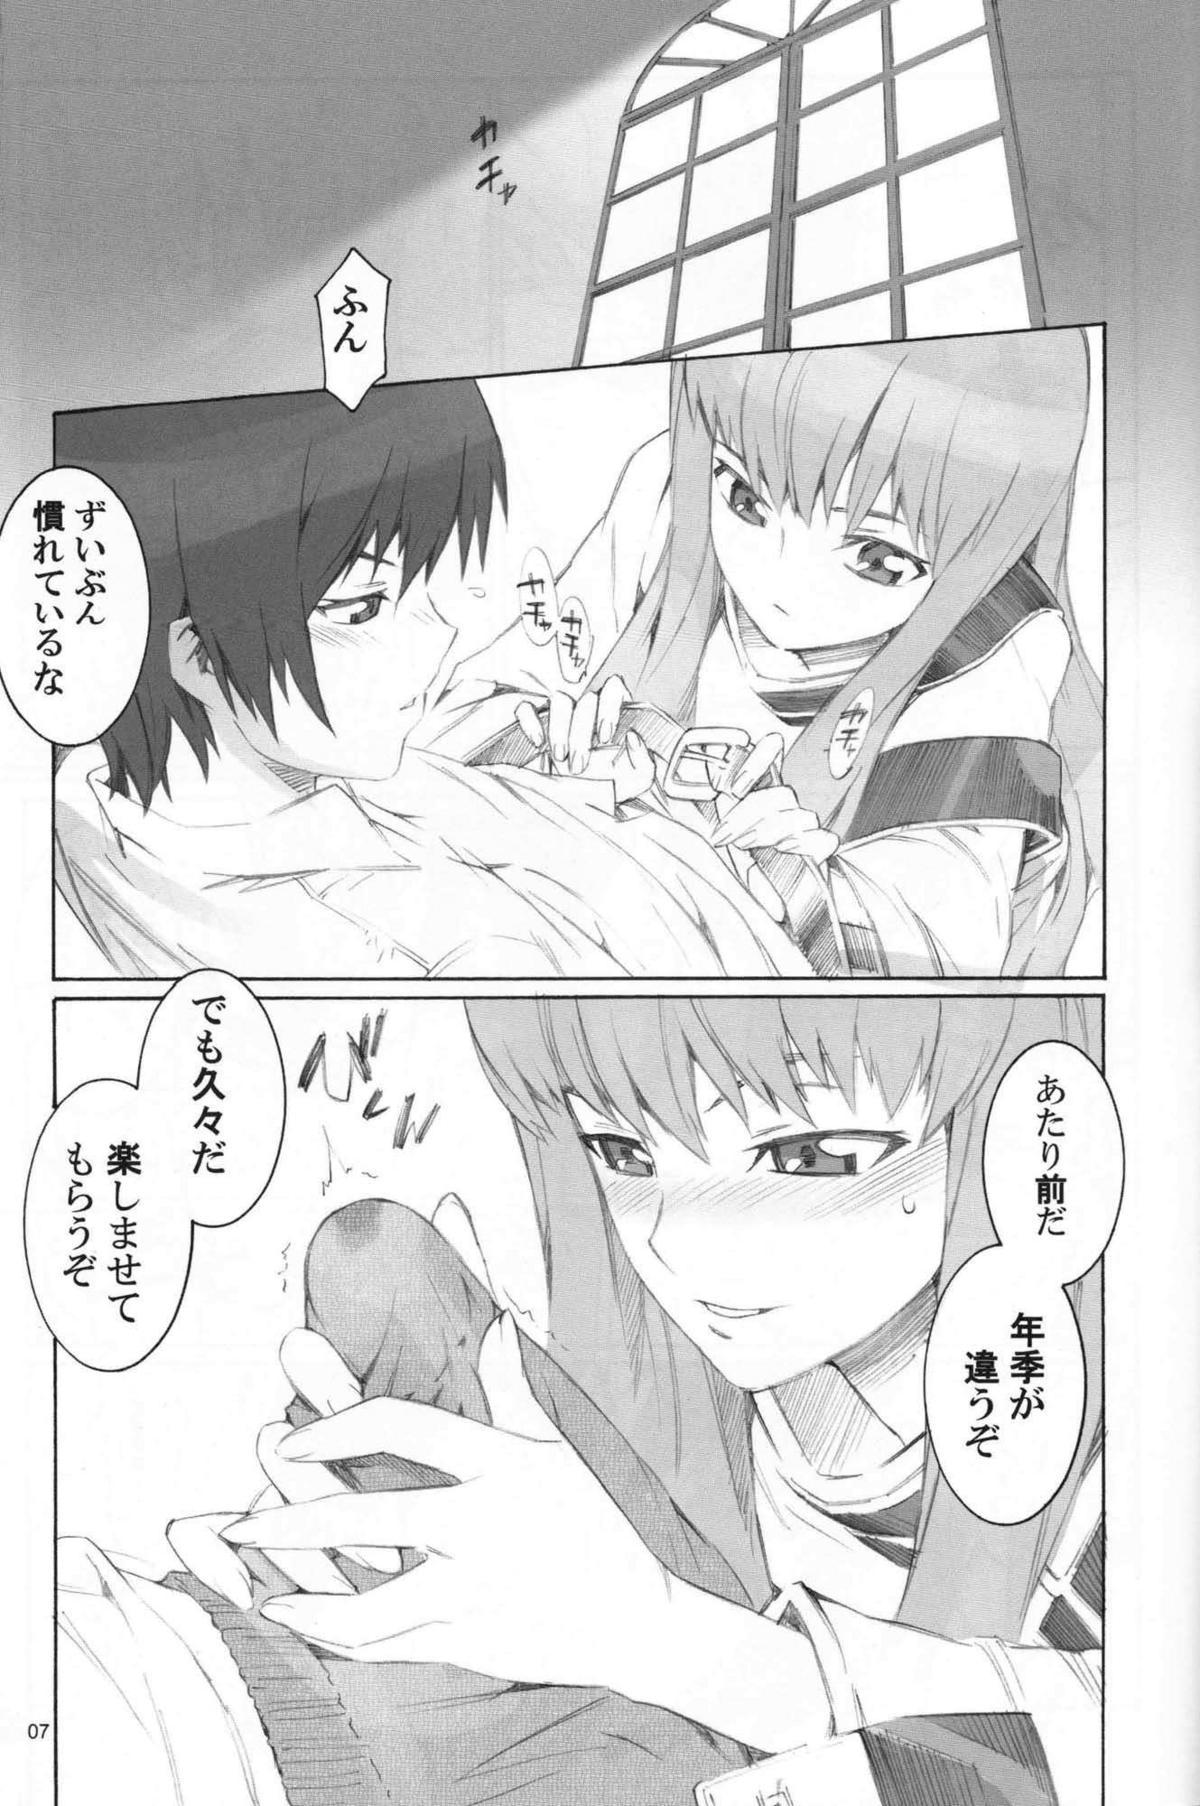 Fantasy Massage SOULFLY 4 - Code geass Show - Page 6